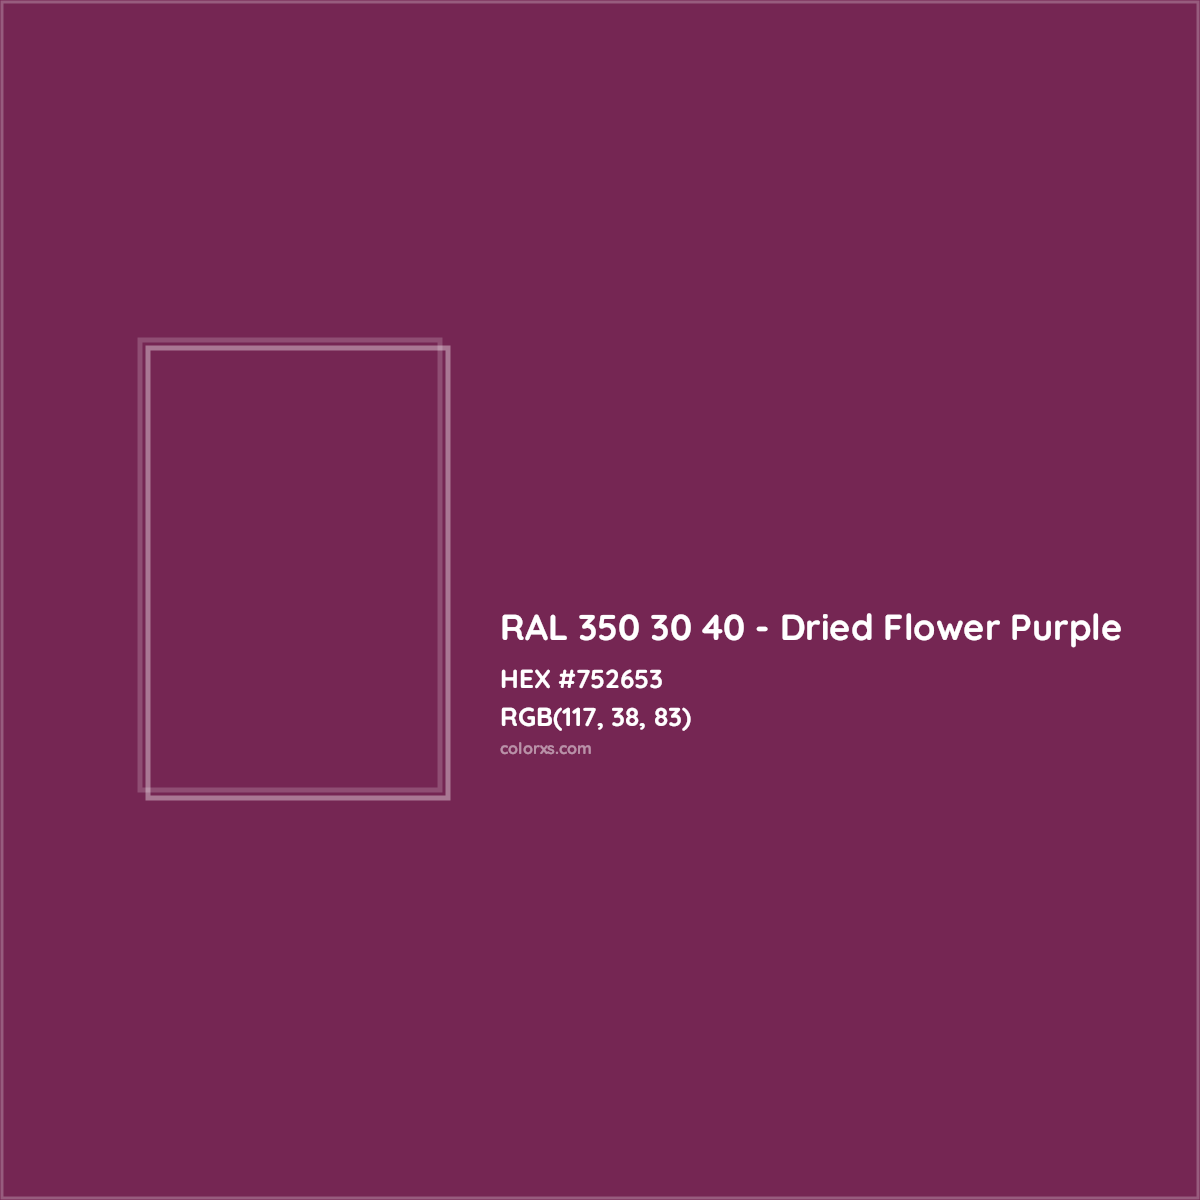 HEX #752653 RAL 350 30 40 - Dried Flower Purple CMS RAL Design - Color Code